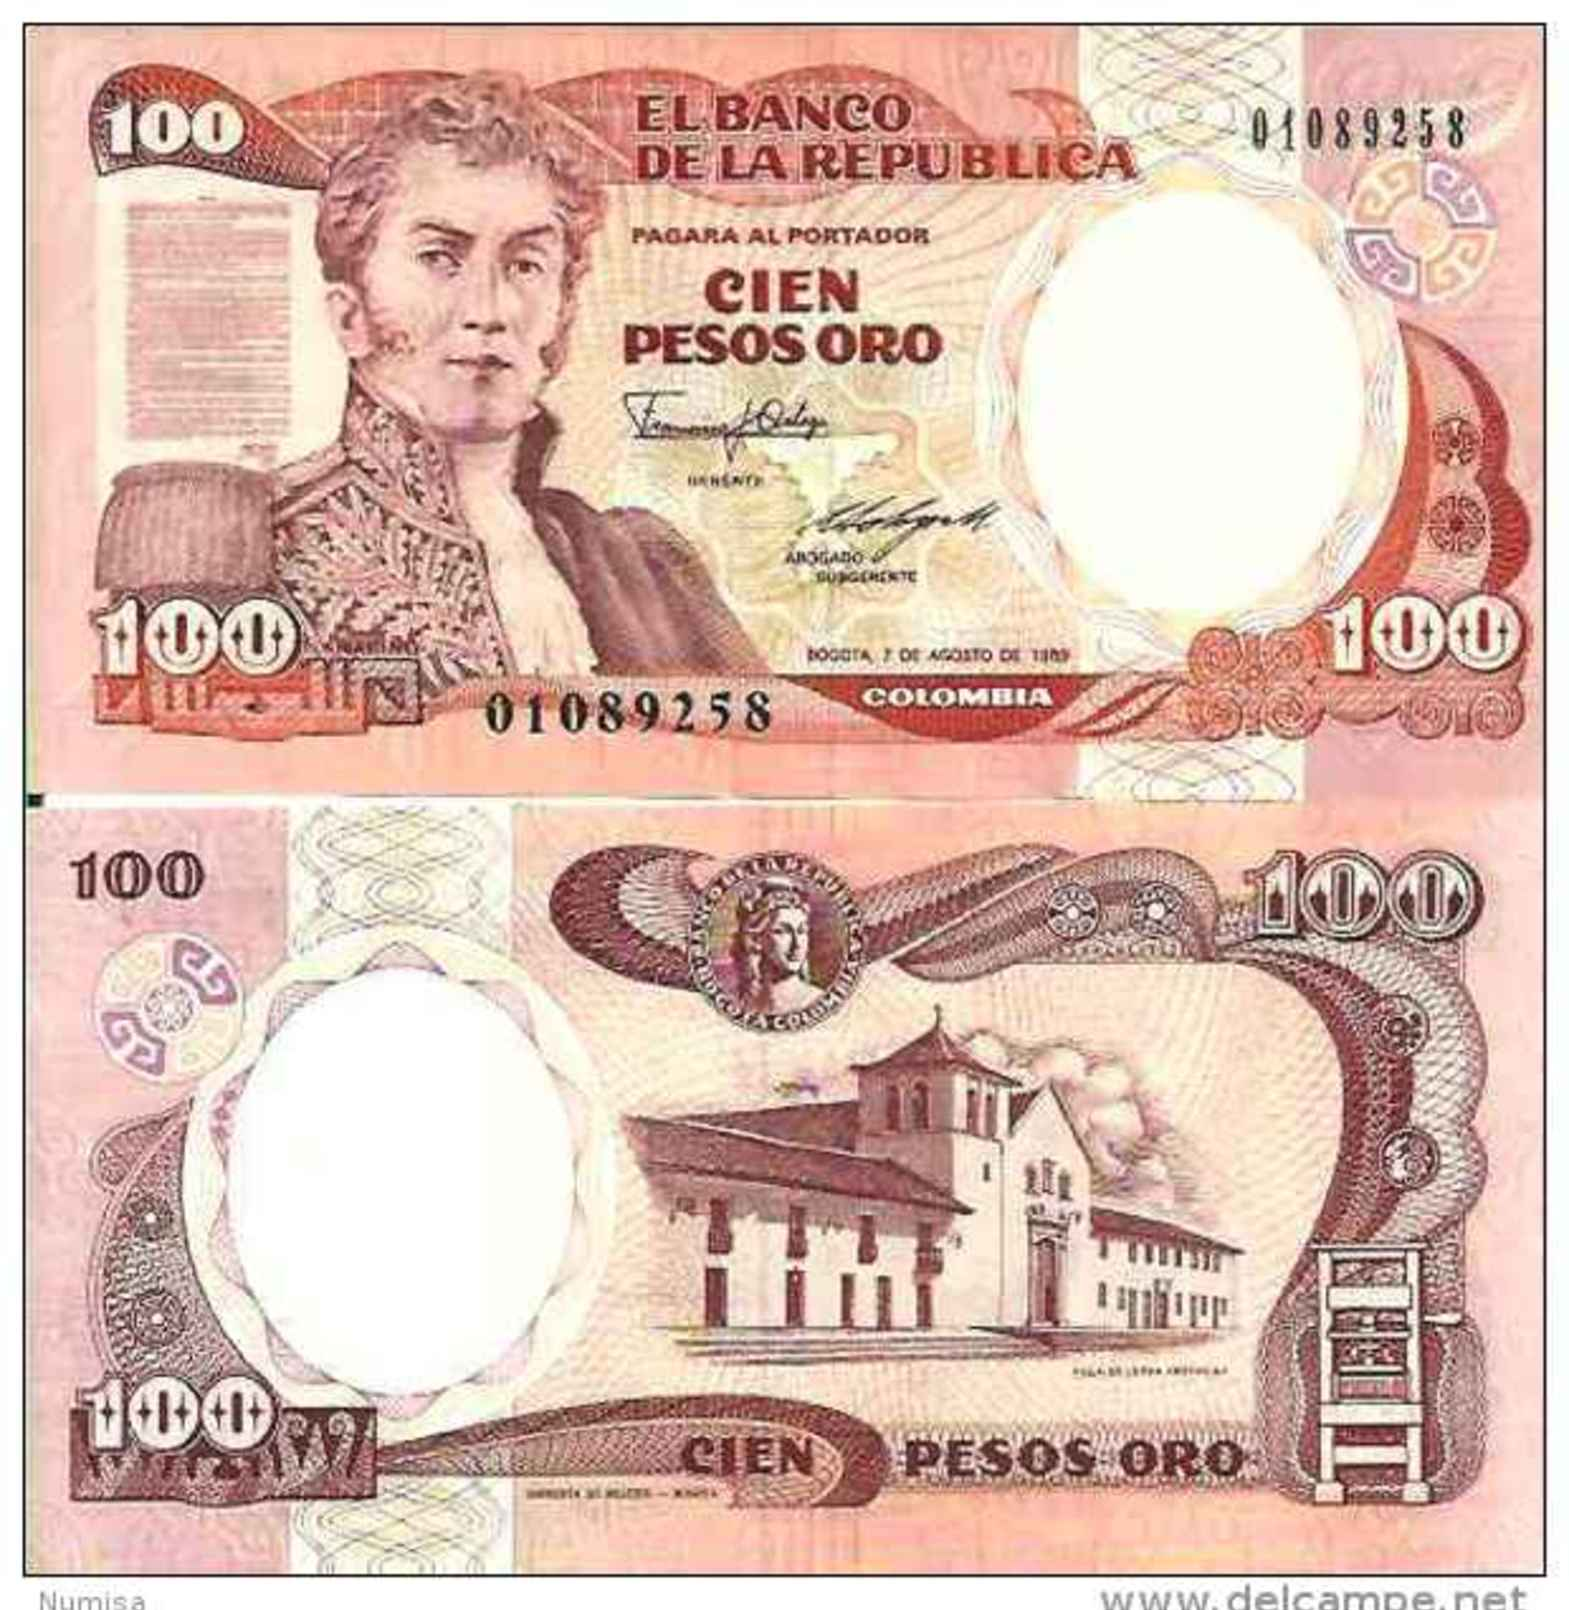 Colombie - Colombia 100 PESOS ORO (1989) Pick 426d NEUF-UNC - Colombie